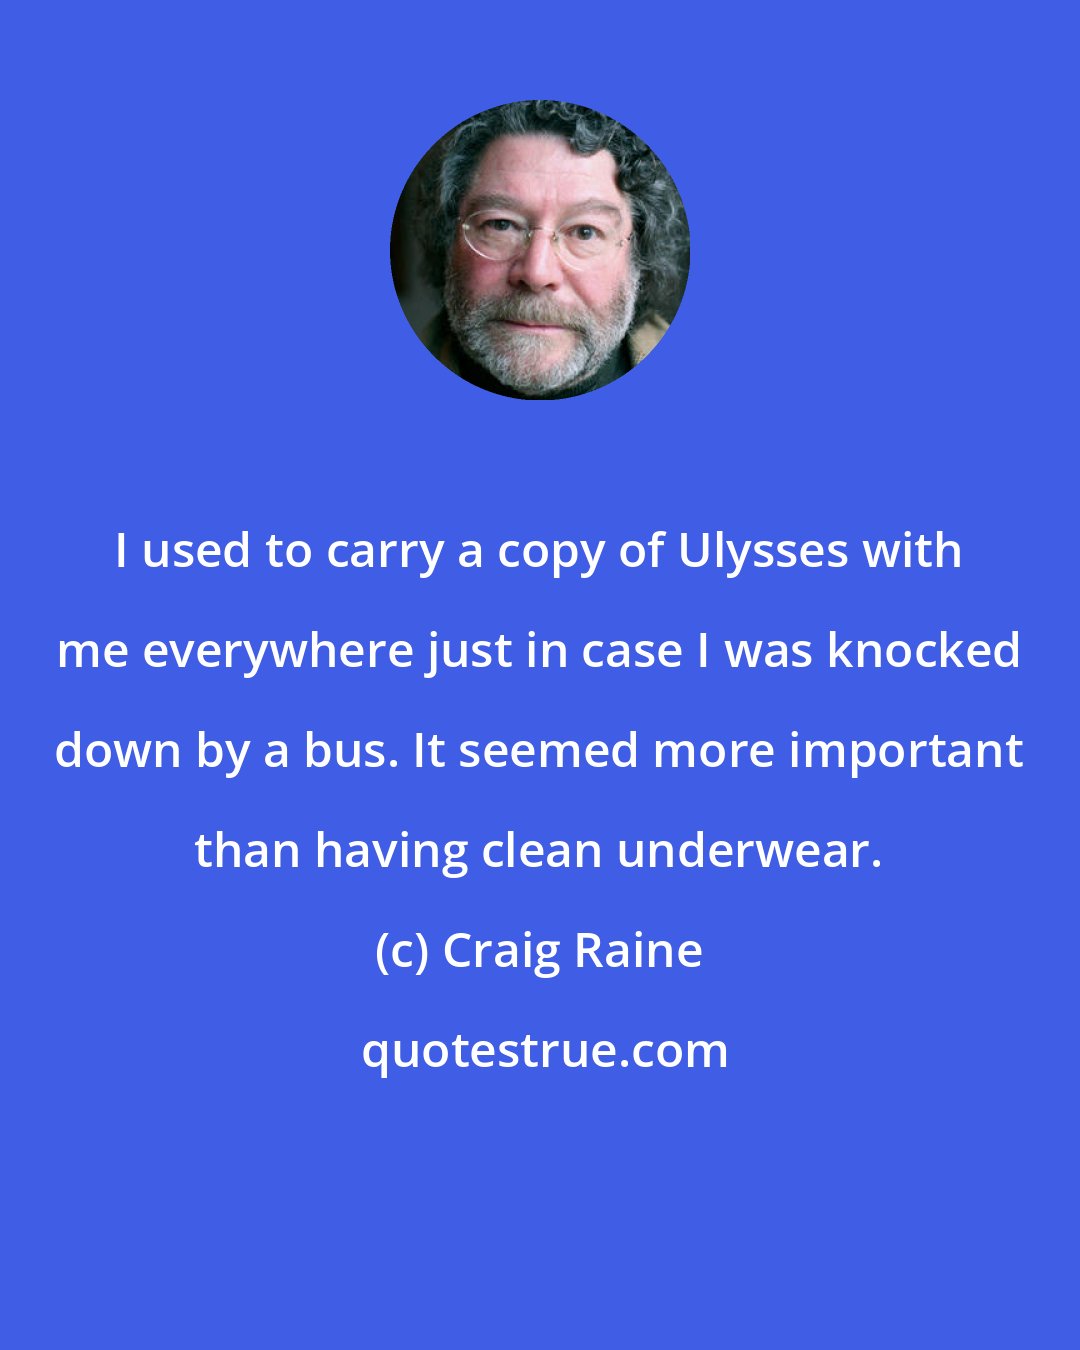 Craig Raine: I used to carry a copy of Ulysses with me everywhere just in case I was knocked down by a bus. It seemed more important than having clean underwear.